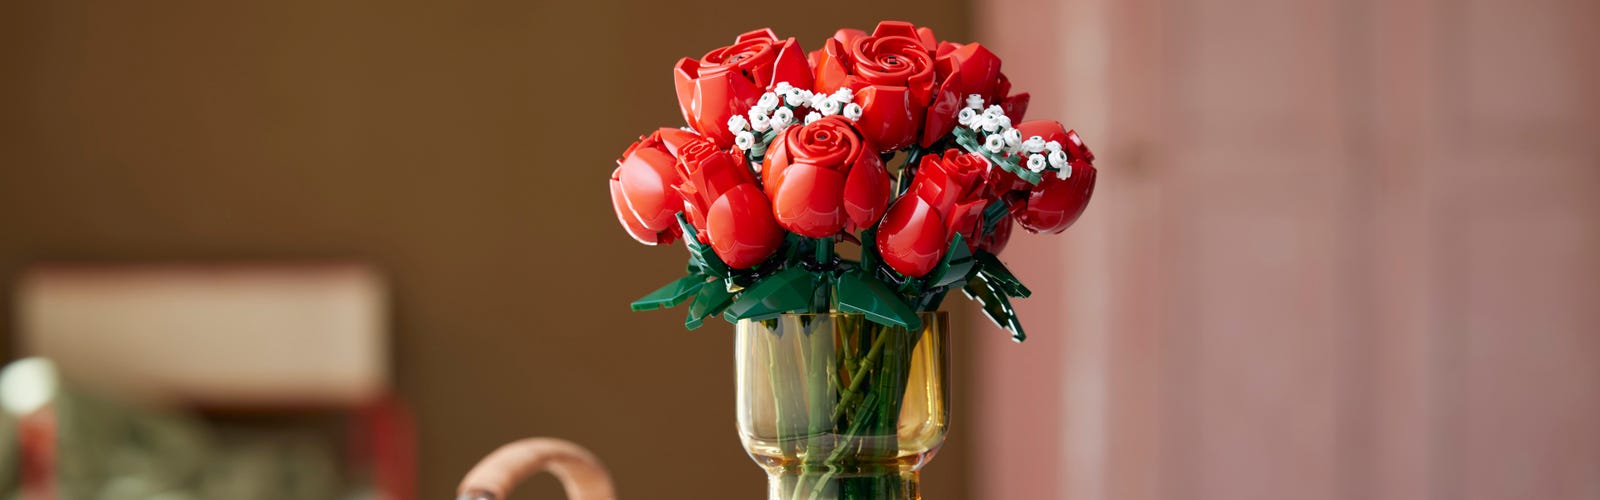 These LEGO Flowers Are the Perfect Alternative to a Valentine's